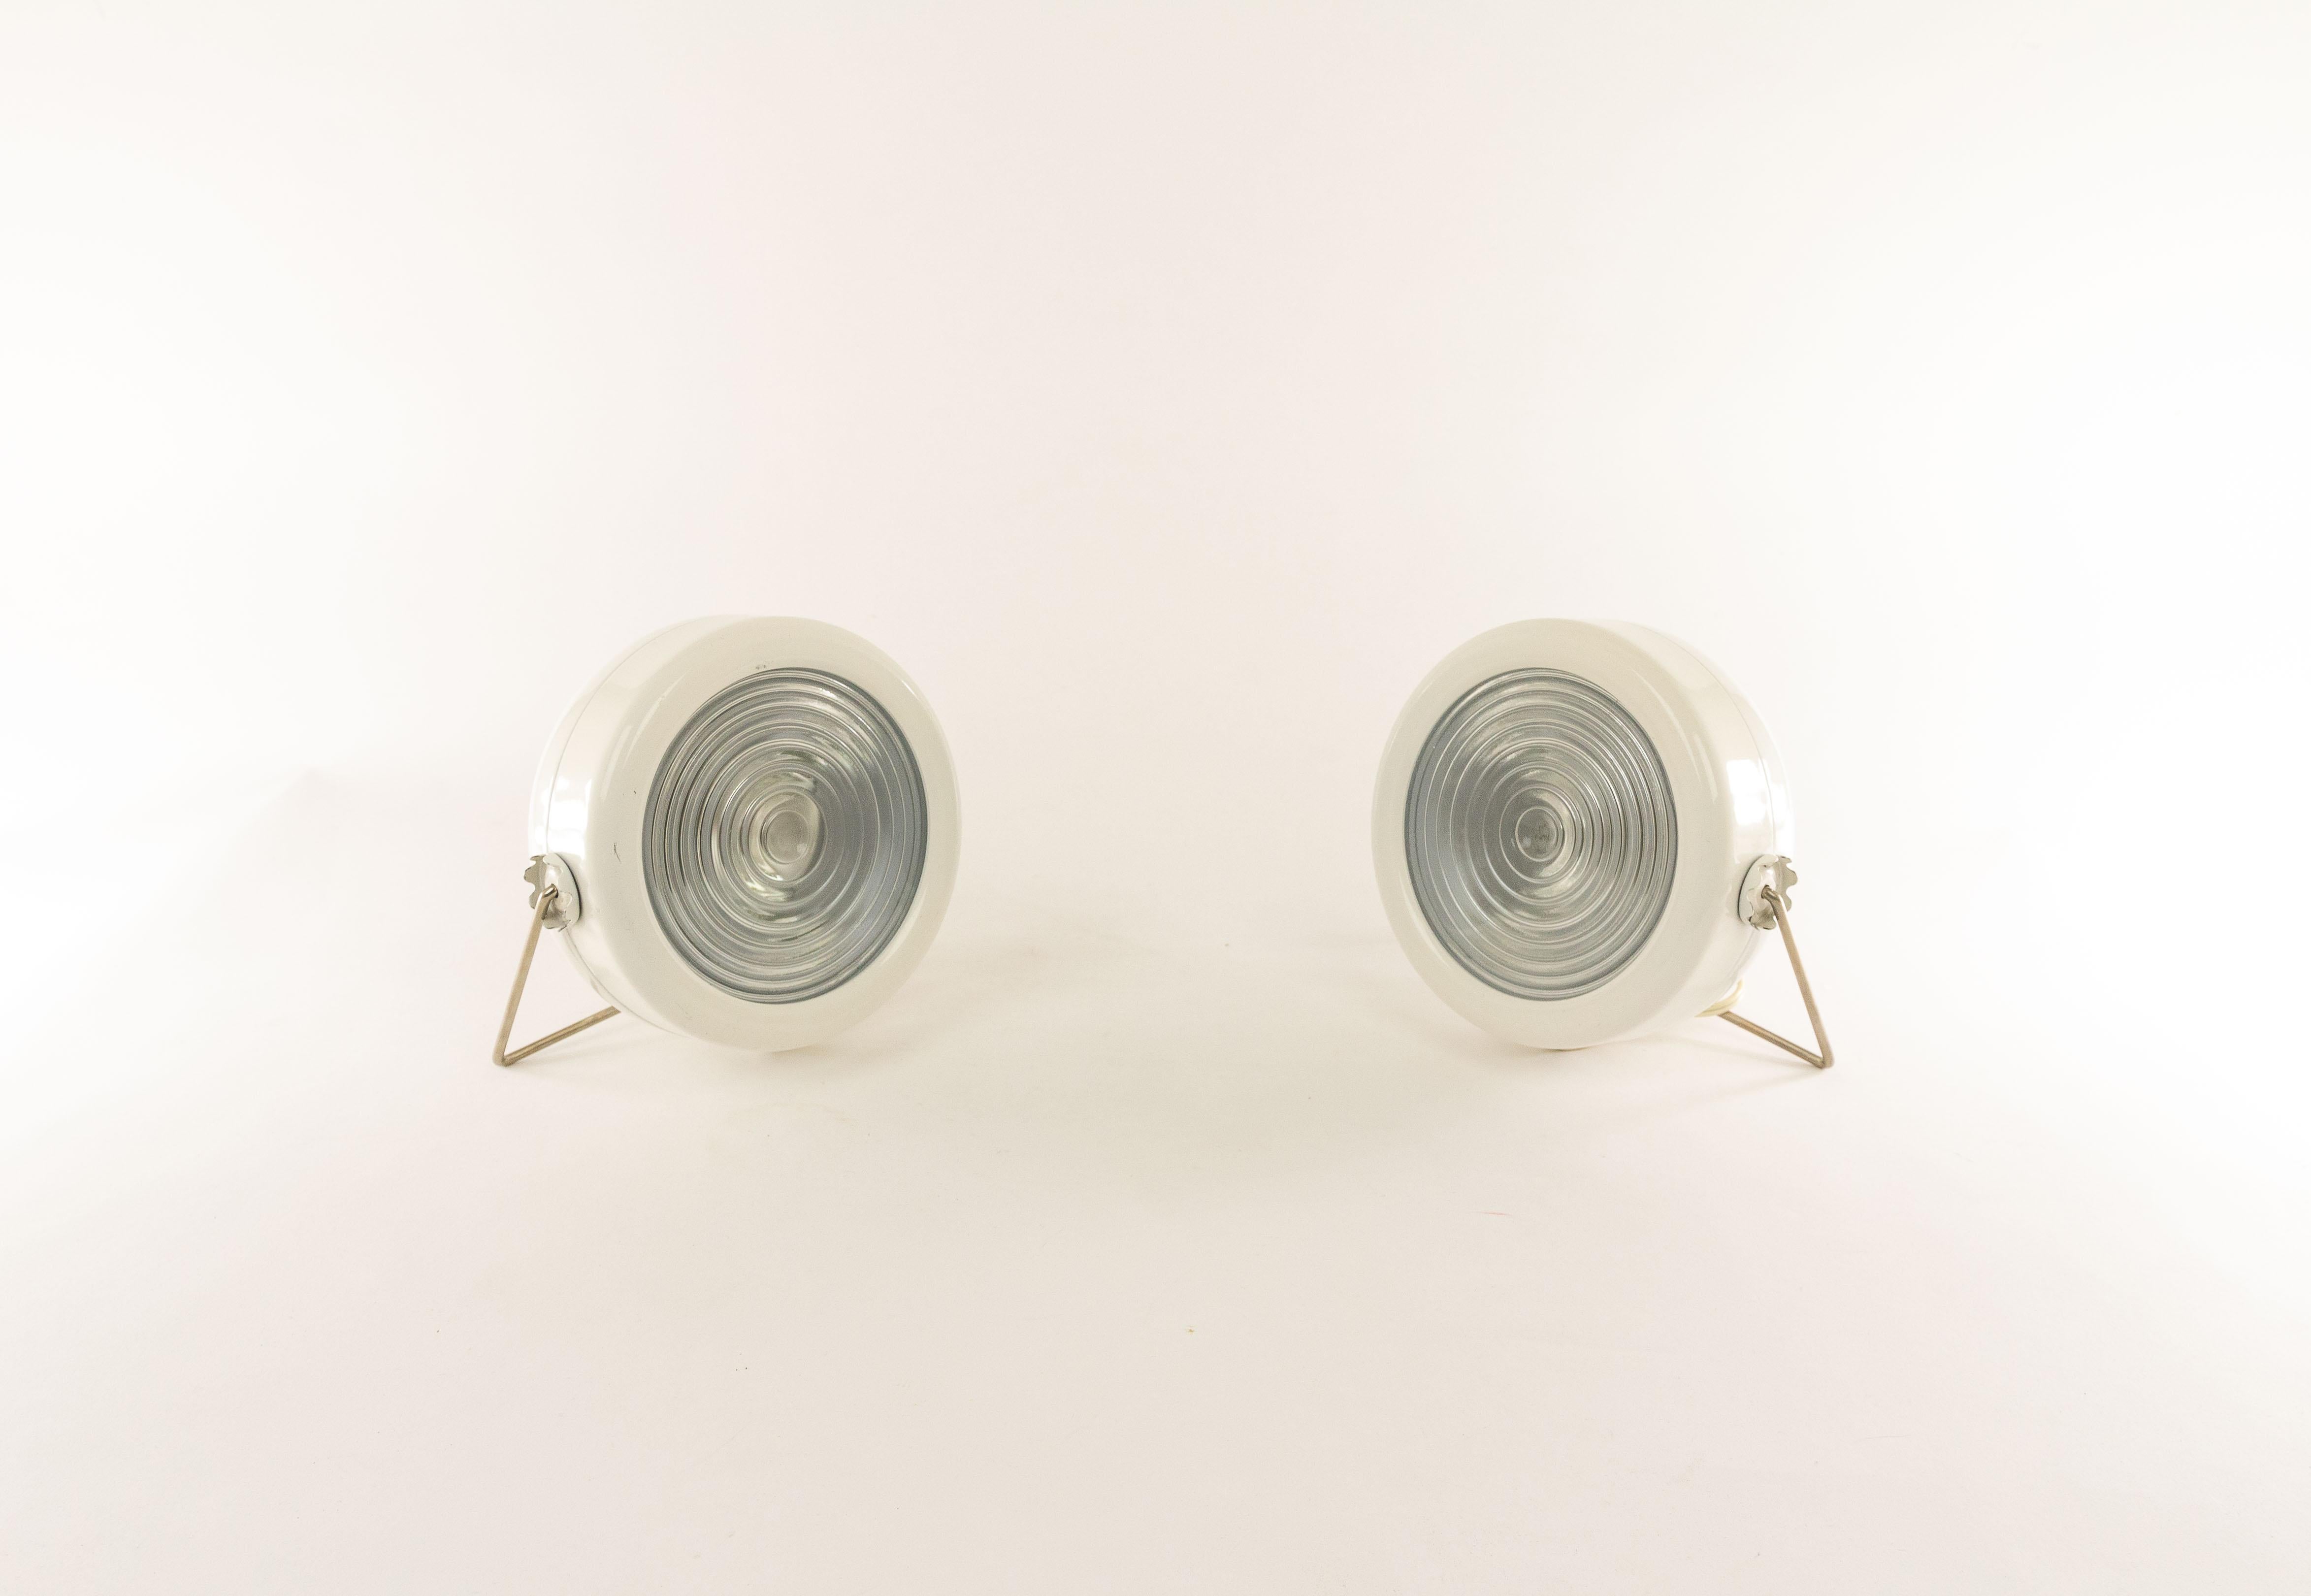 A pair of Sciuko lamps designed in 1966 by Achille & Pier Giacomo Castiglioni and produced by the Italian lighting manufacturer Flos.

The lamp consists of a enameled metal body with two gears which allow the bracket to lock into different